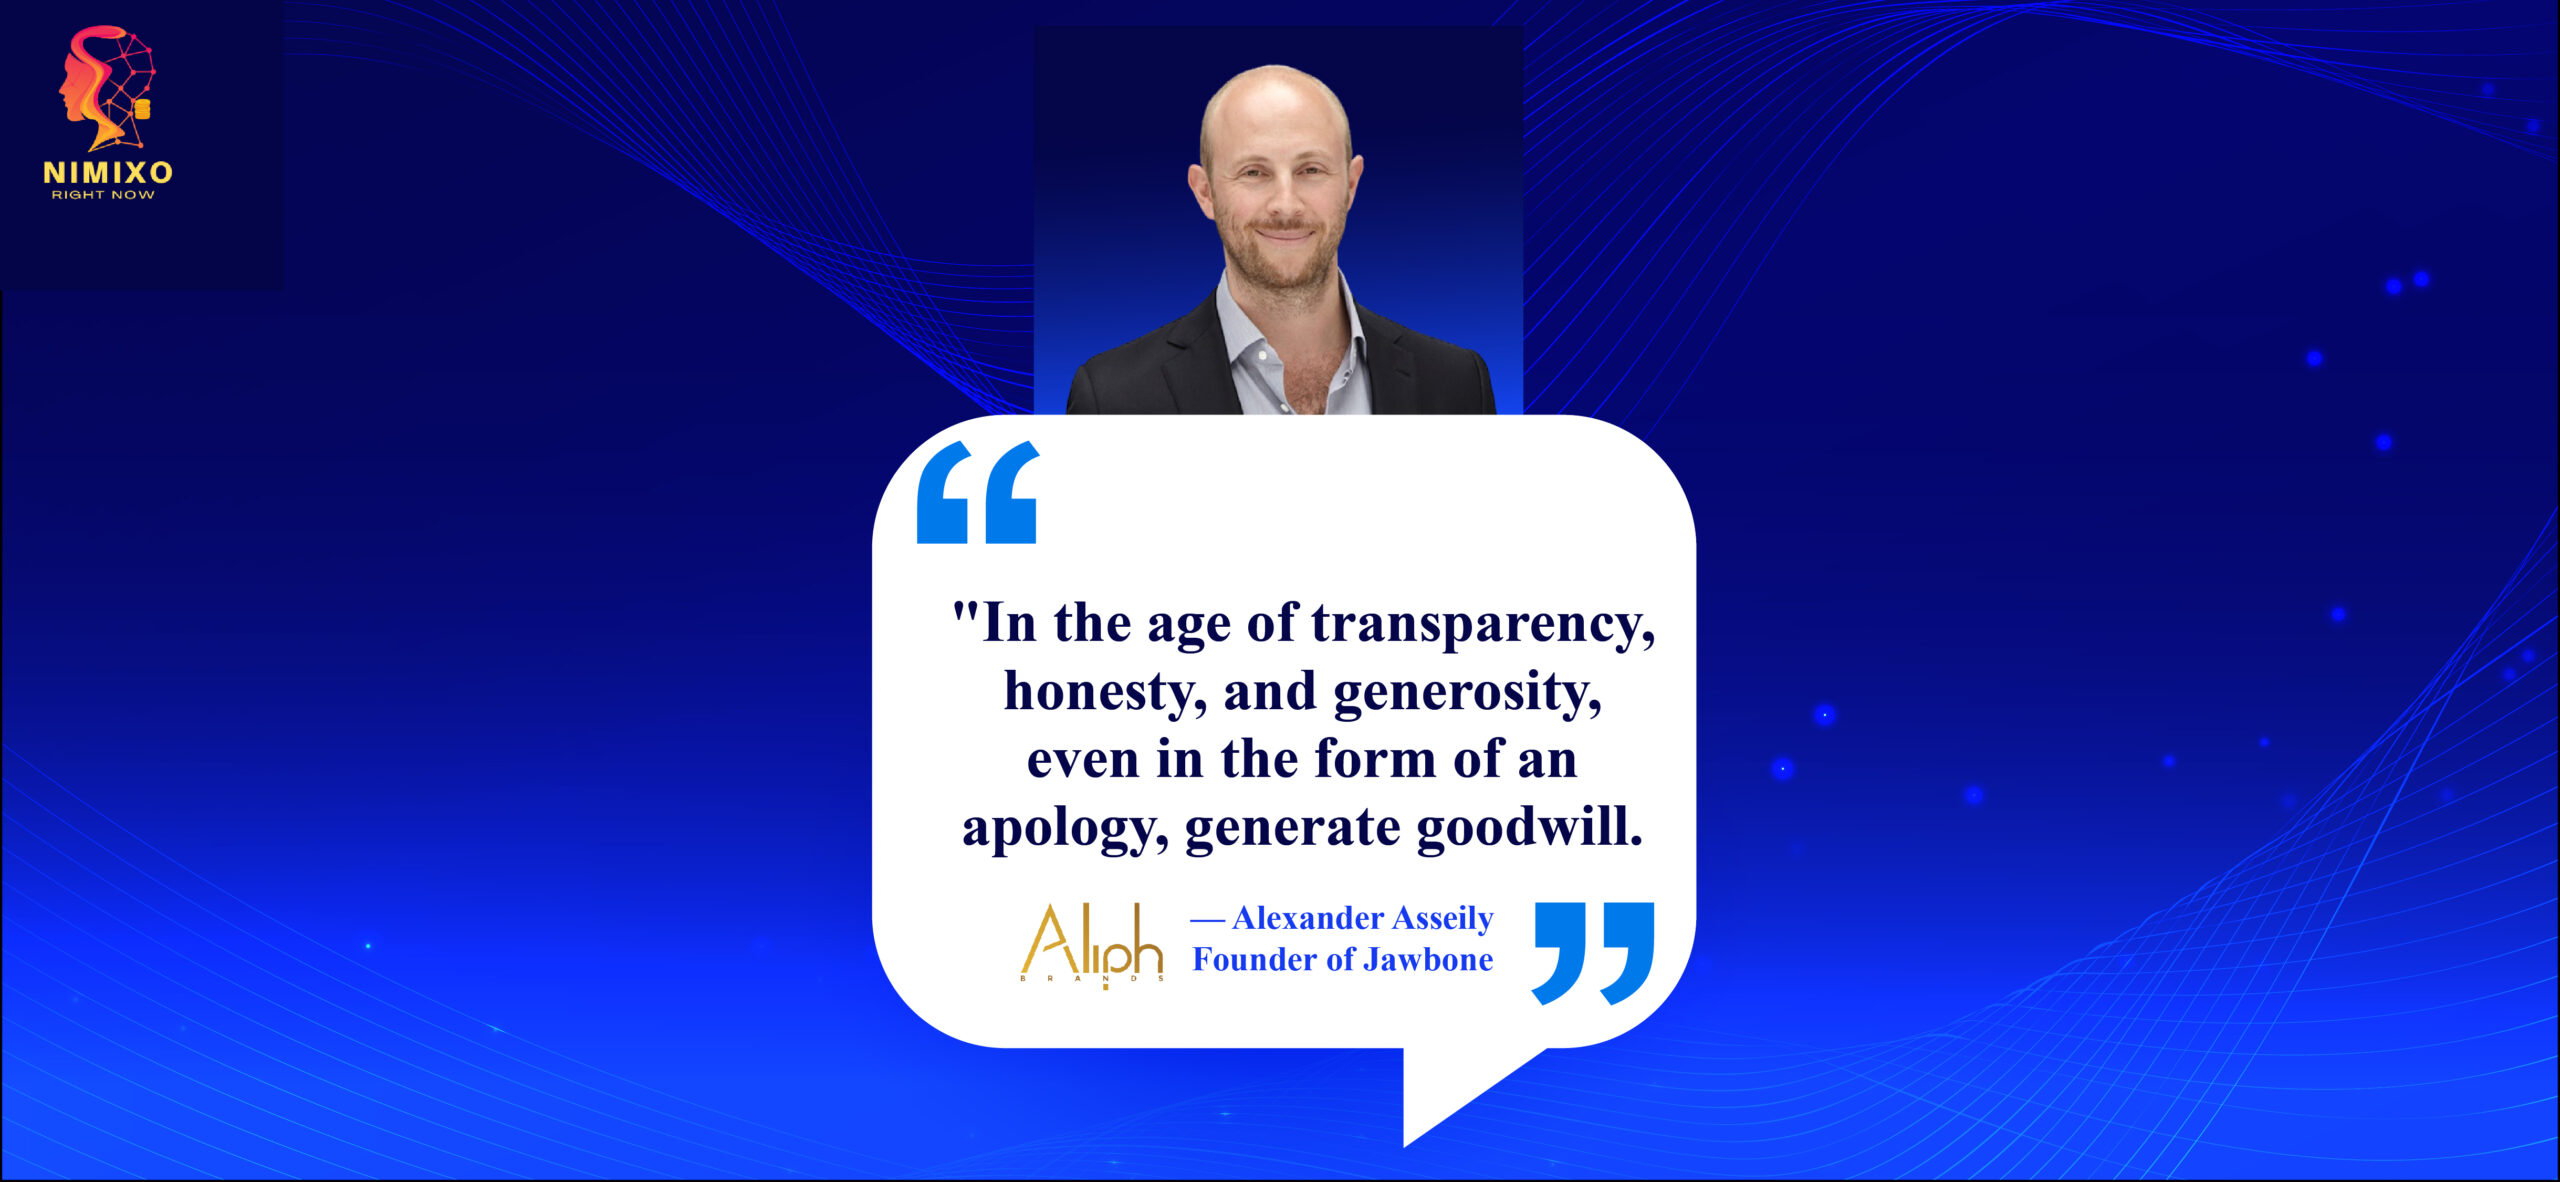 Own It, Win It: Transparency's Powerful Impact on Trust. In the age of transparency, honesty, and generosity, even in the form of an apology, generate goodwill. -Alexander Asseily, founder of Jawbone